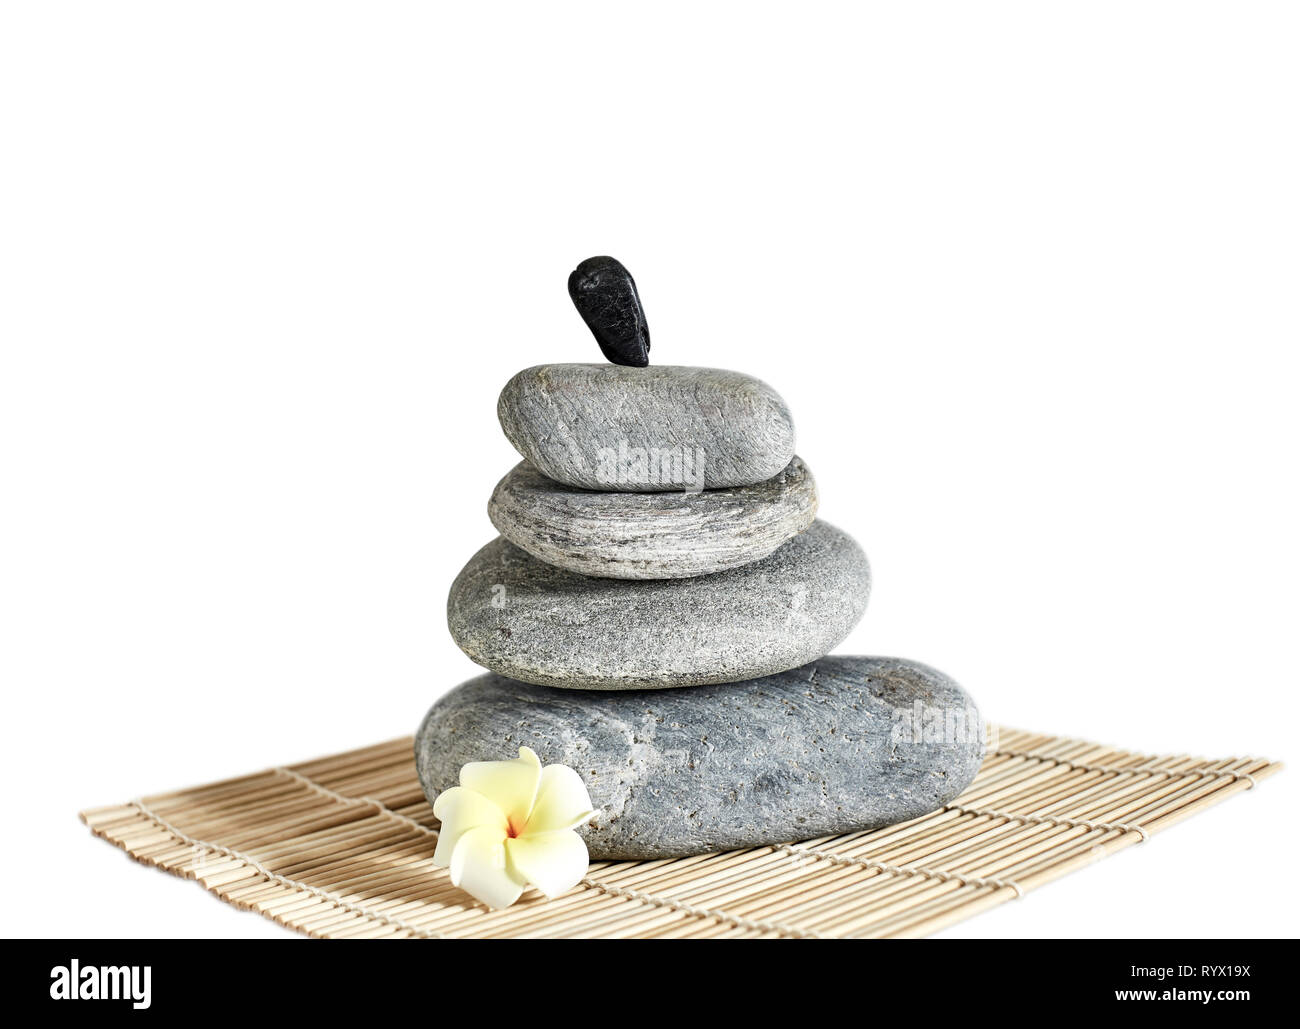 River rocks balanced on one another on a bamboo mat with a ...